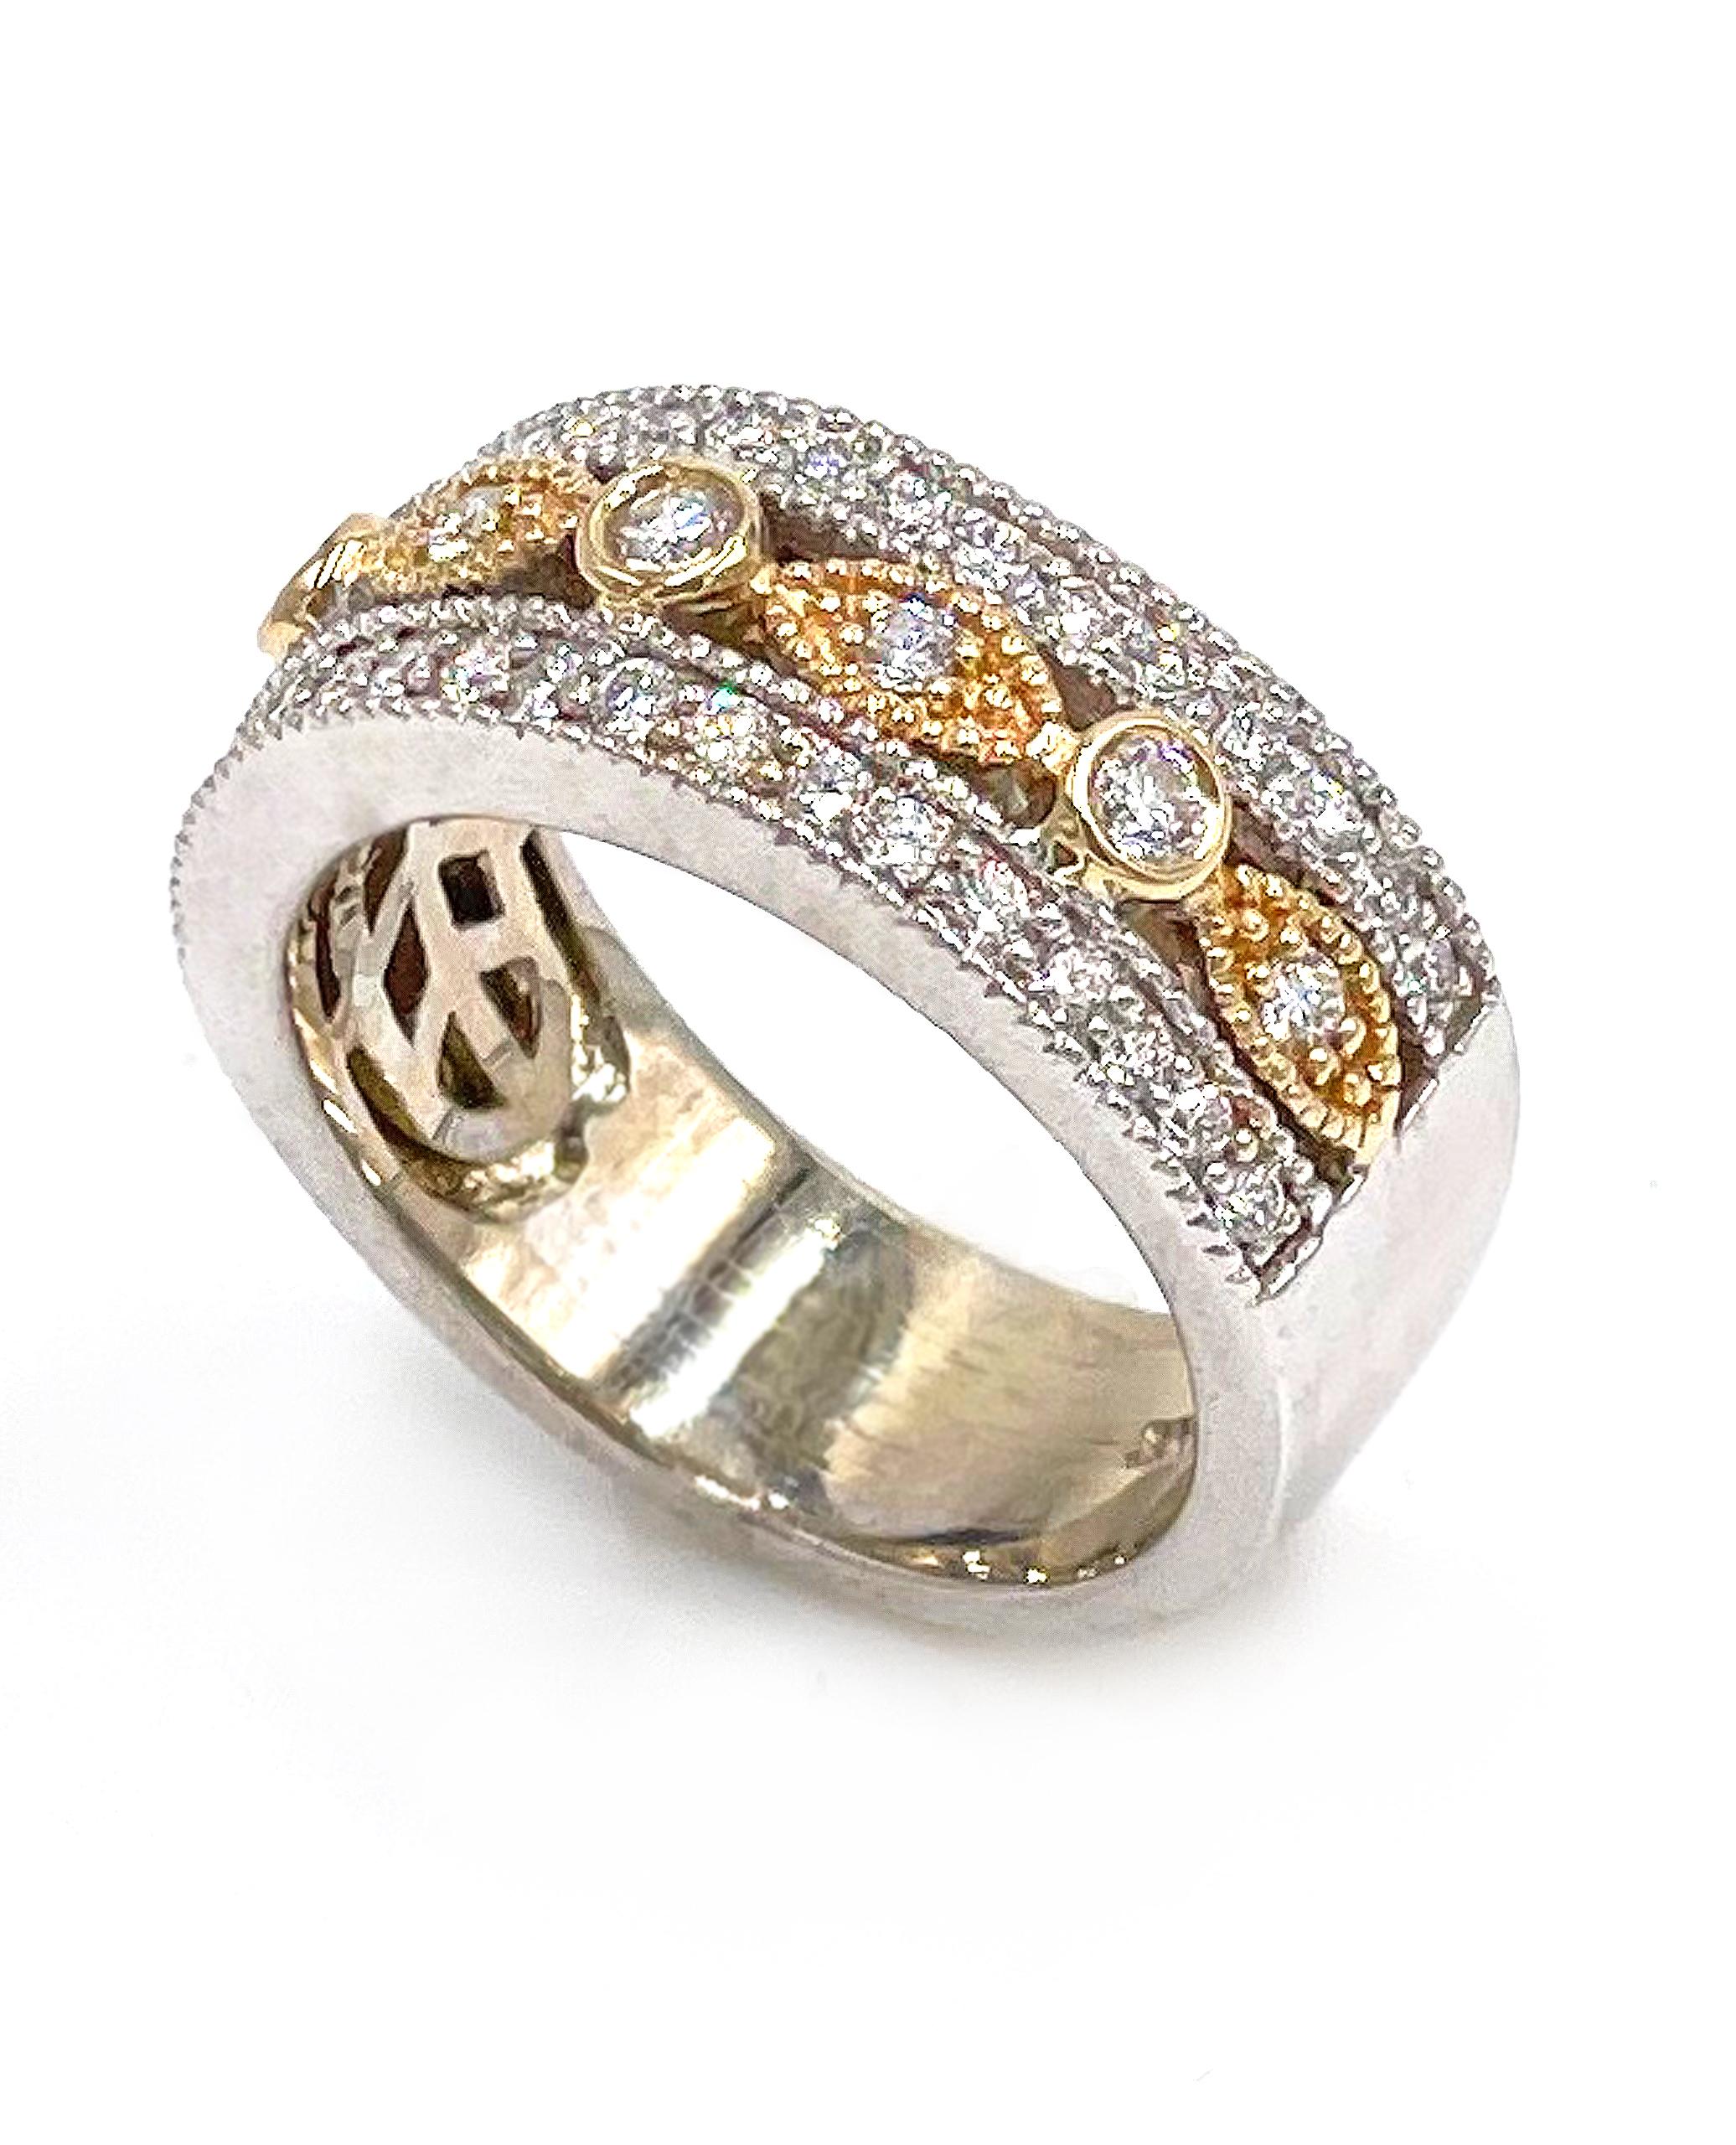 14K white and rose gold antique inspired ring with miligrain detailing.  The ring is furnished with 43 round brilliant-cut diamonds 0.60 carats total weight.

* Diamonds are G/H color, SI1 clarity.
* Finger size 5.75
* Approximately 8mm wide on top